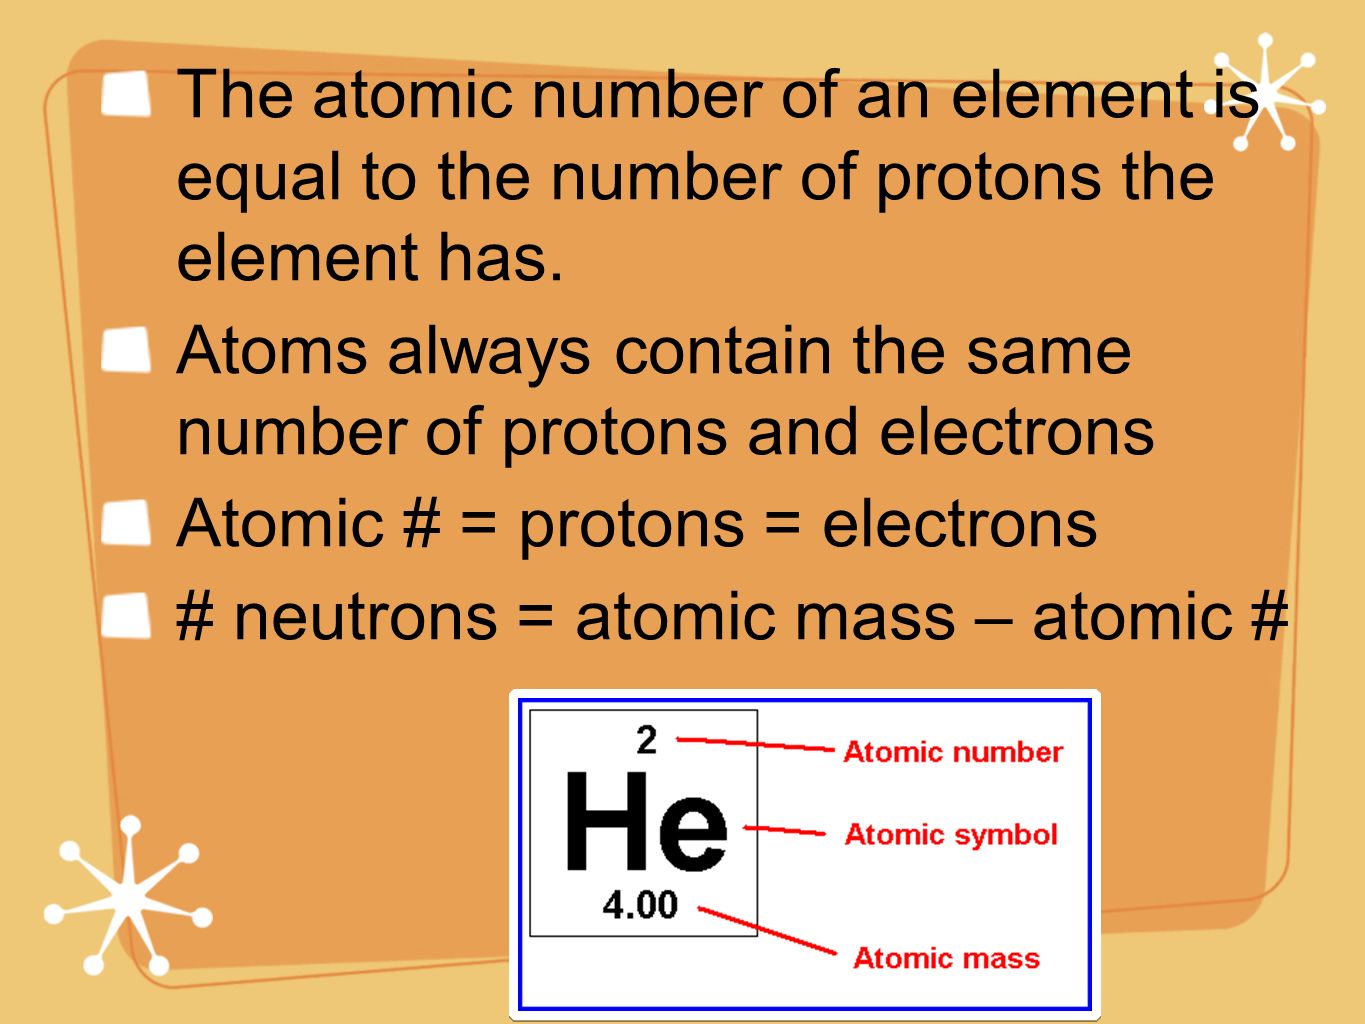 The atomic number of an element is equal to the number of protons the element has.